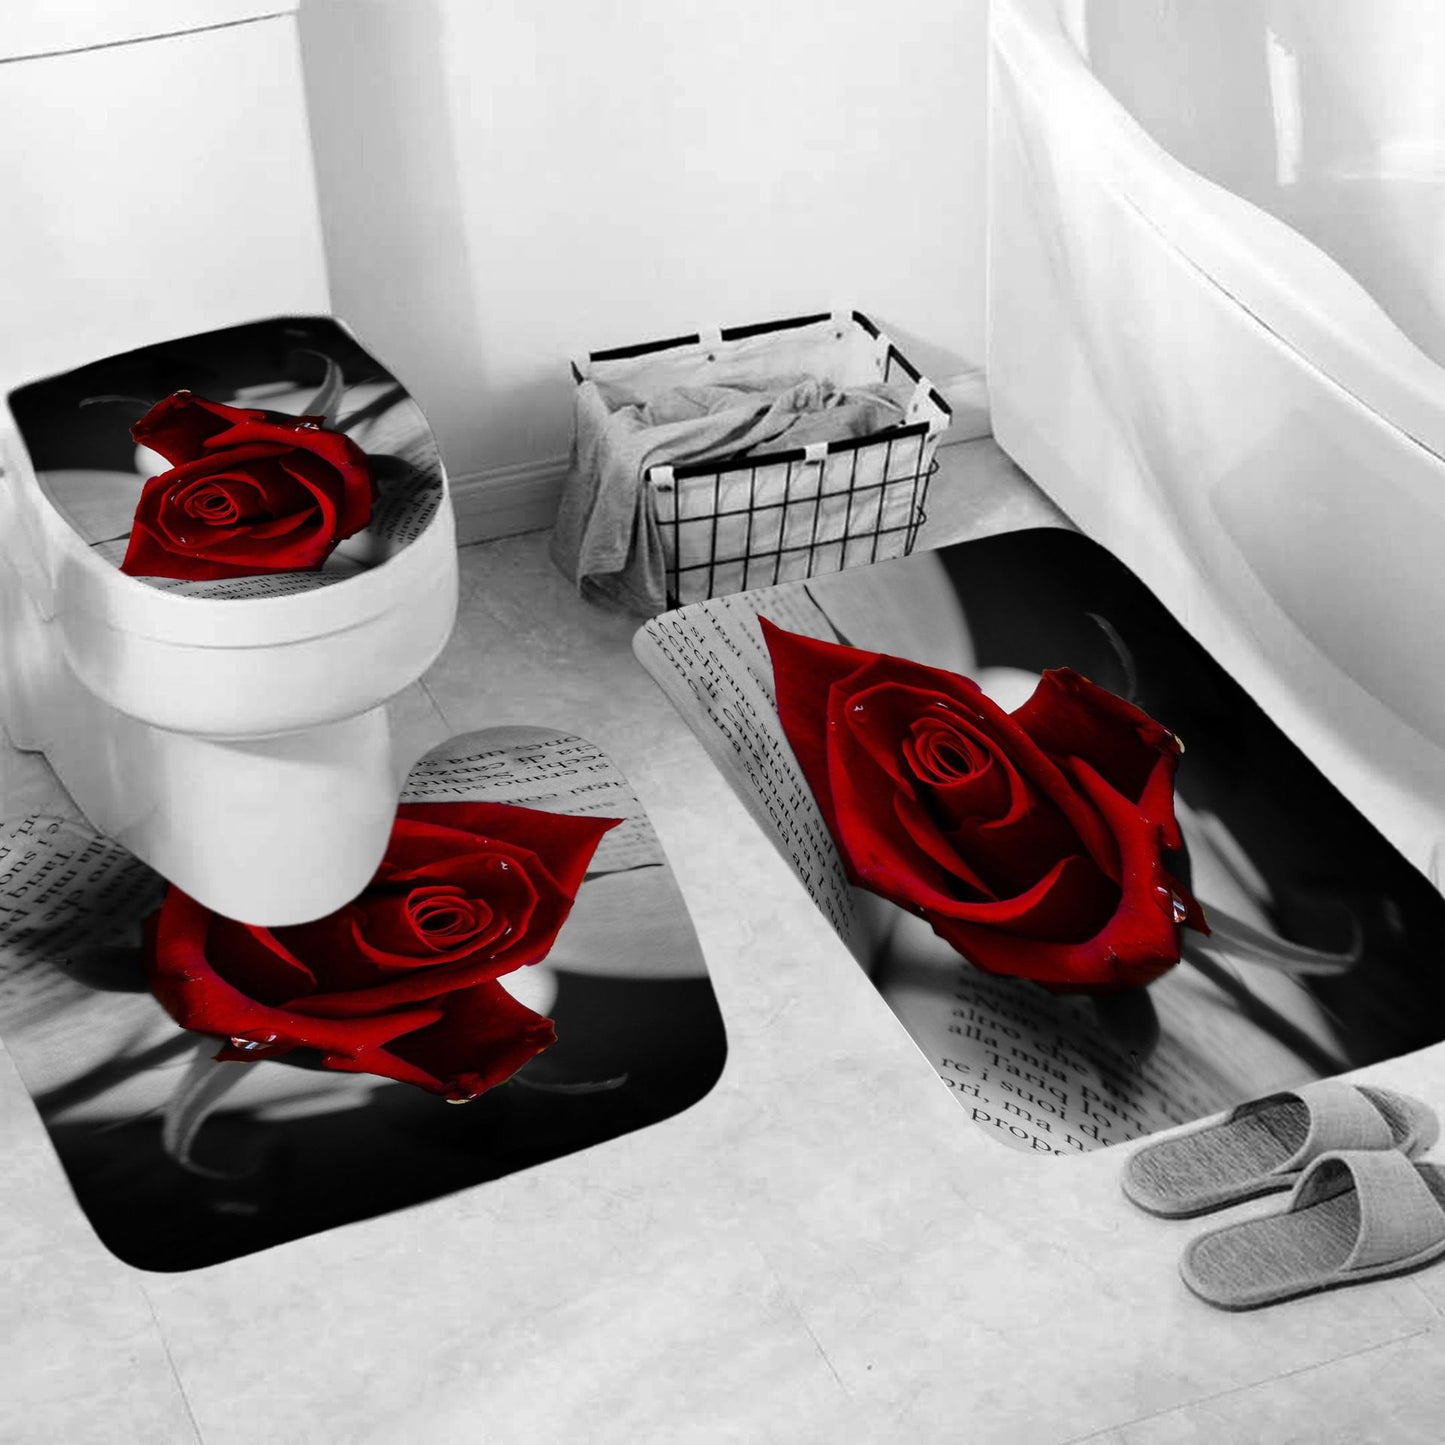 Elegant Book with Red Rose Shower Curtain Set - 4 Pcs